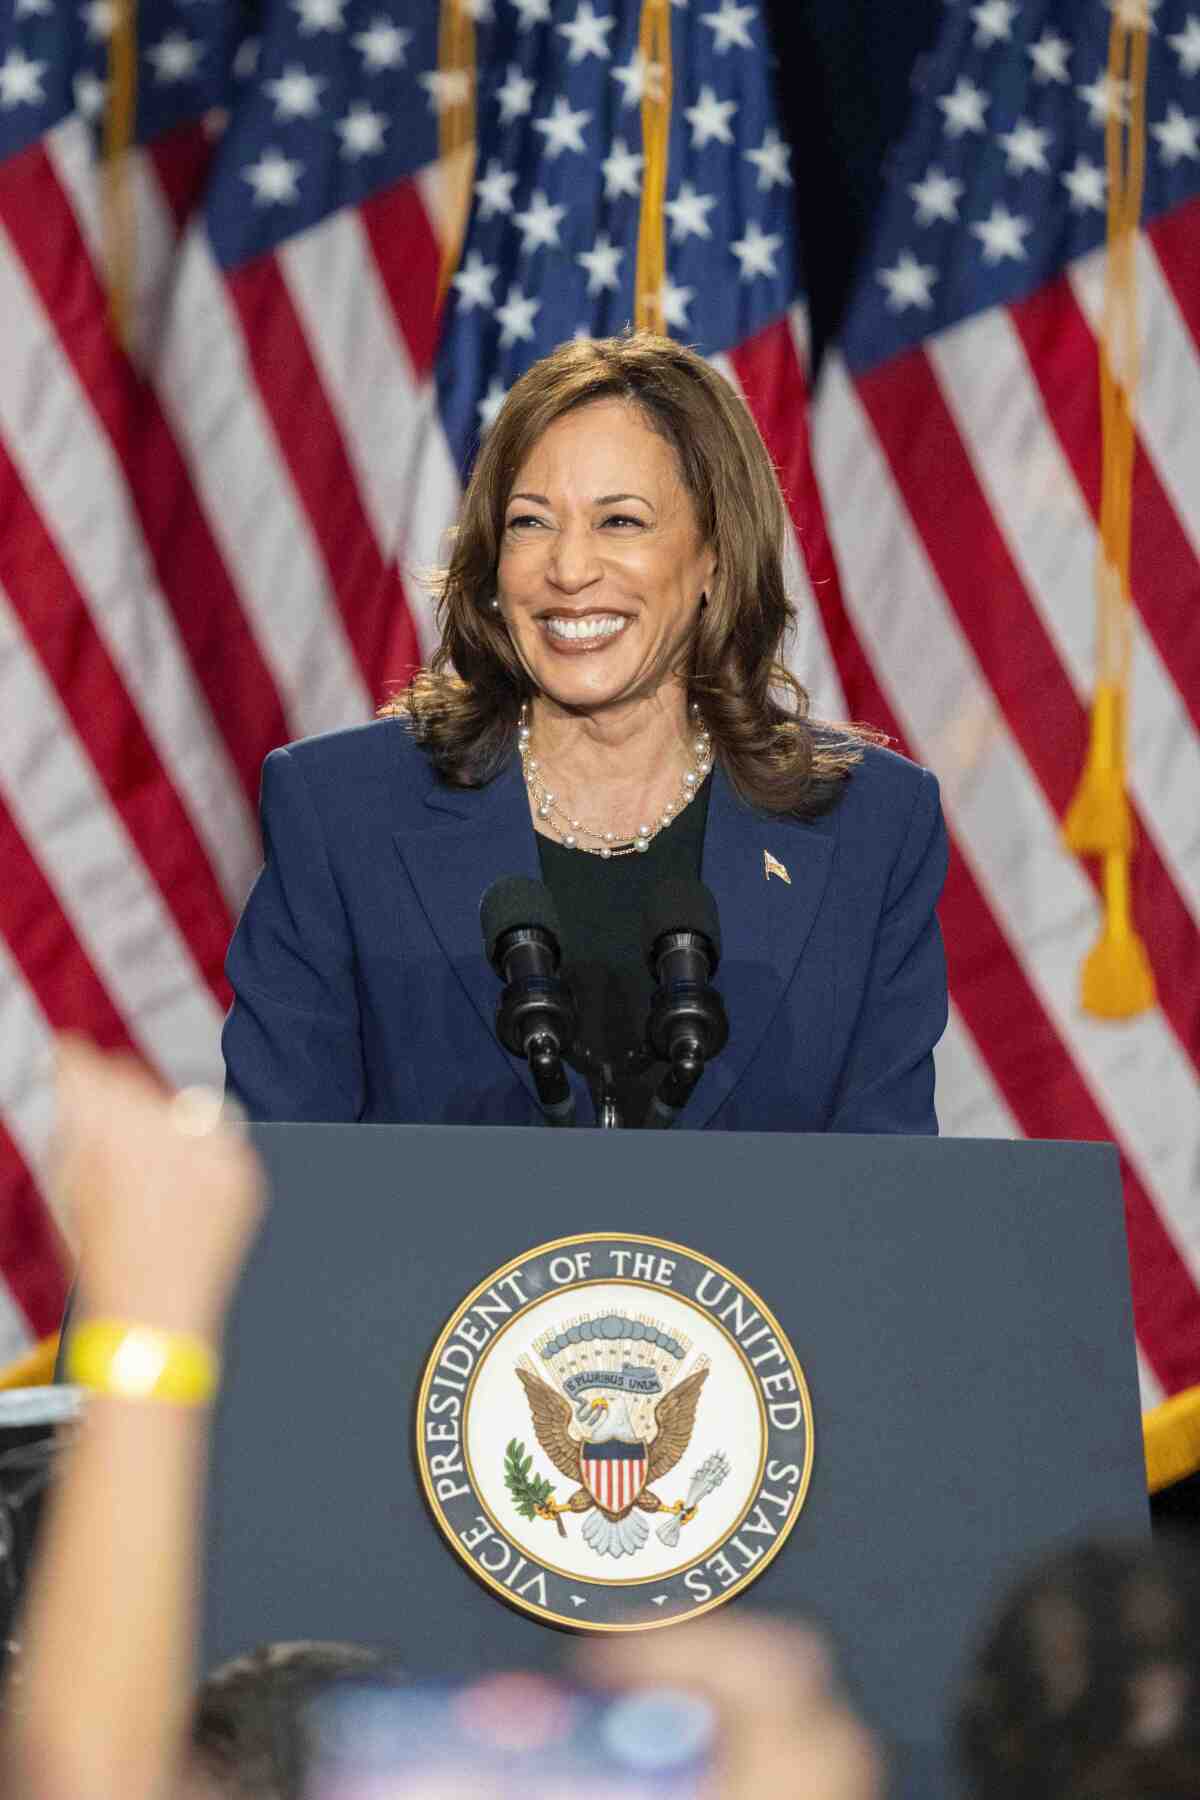 Vice President Kamala Harris stands, smiling, at a dais with American flags in the background. 